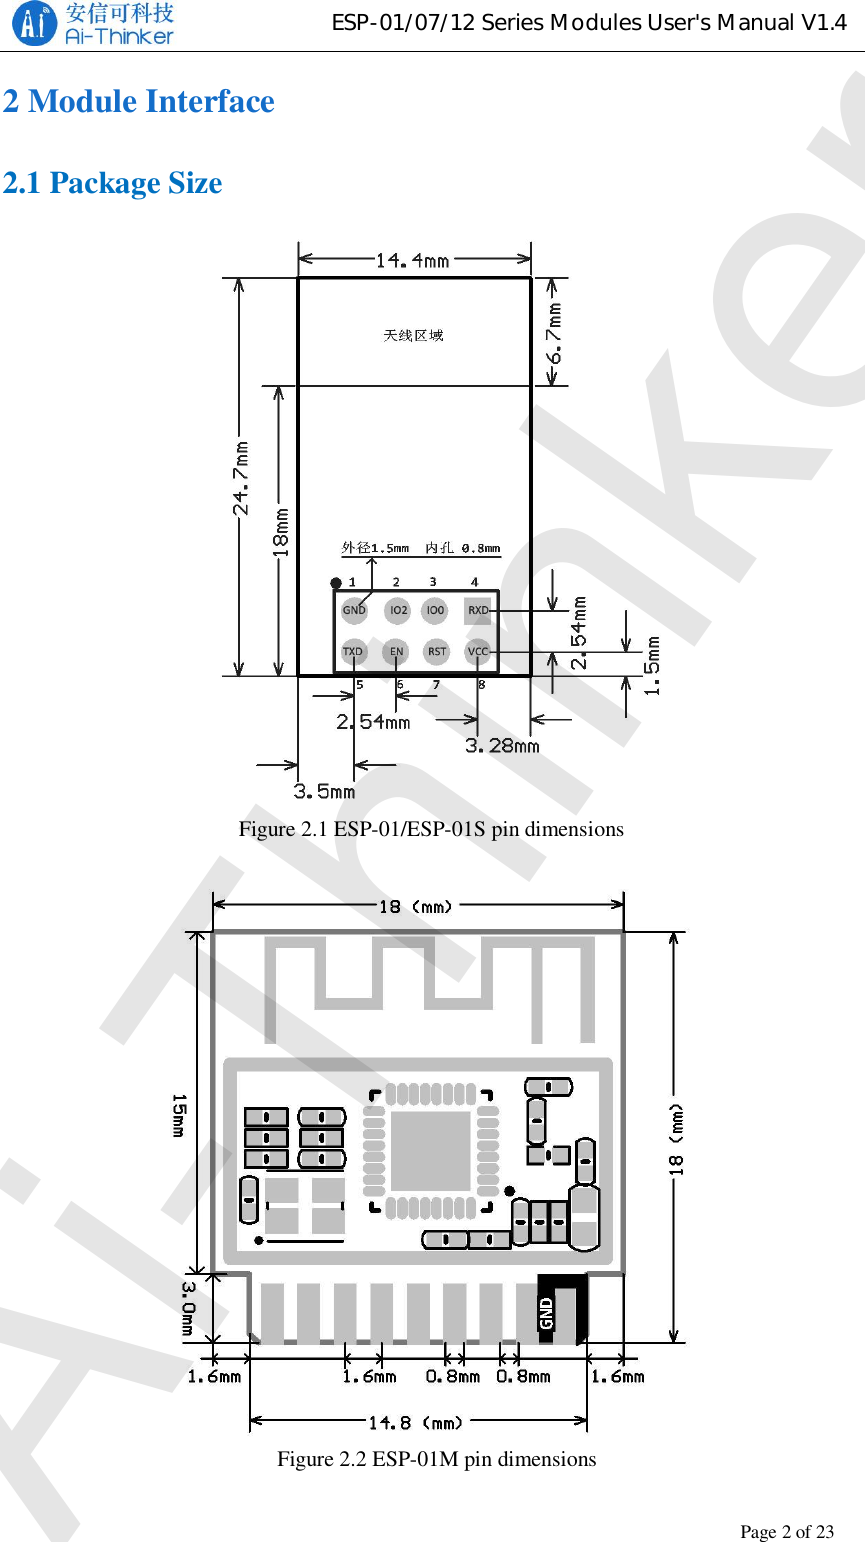 ESP-01/07/12 Series Modules User&apos;s Manual V1.4Copyright © 2017 Shenzhen Ai-Thinker Technology Co., Ltd All Rights ReservedPage2of232 Module Interface2.1 Package SizeFigure 2.1 ESP-01/ESP-01S pin dimensions  Figure 2.2 ESP-01M pin dimensionsAi-Thinker